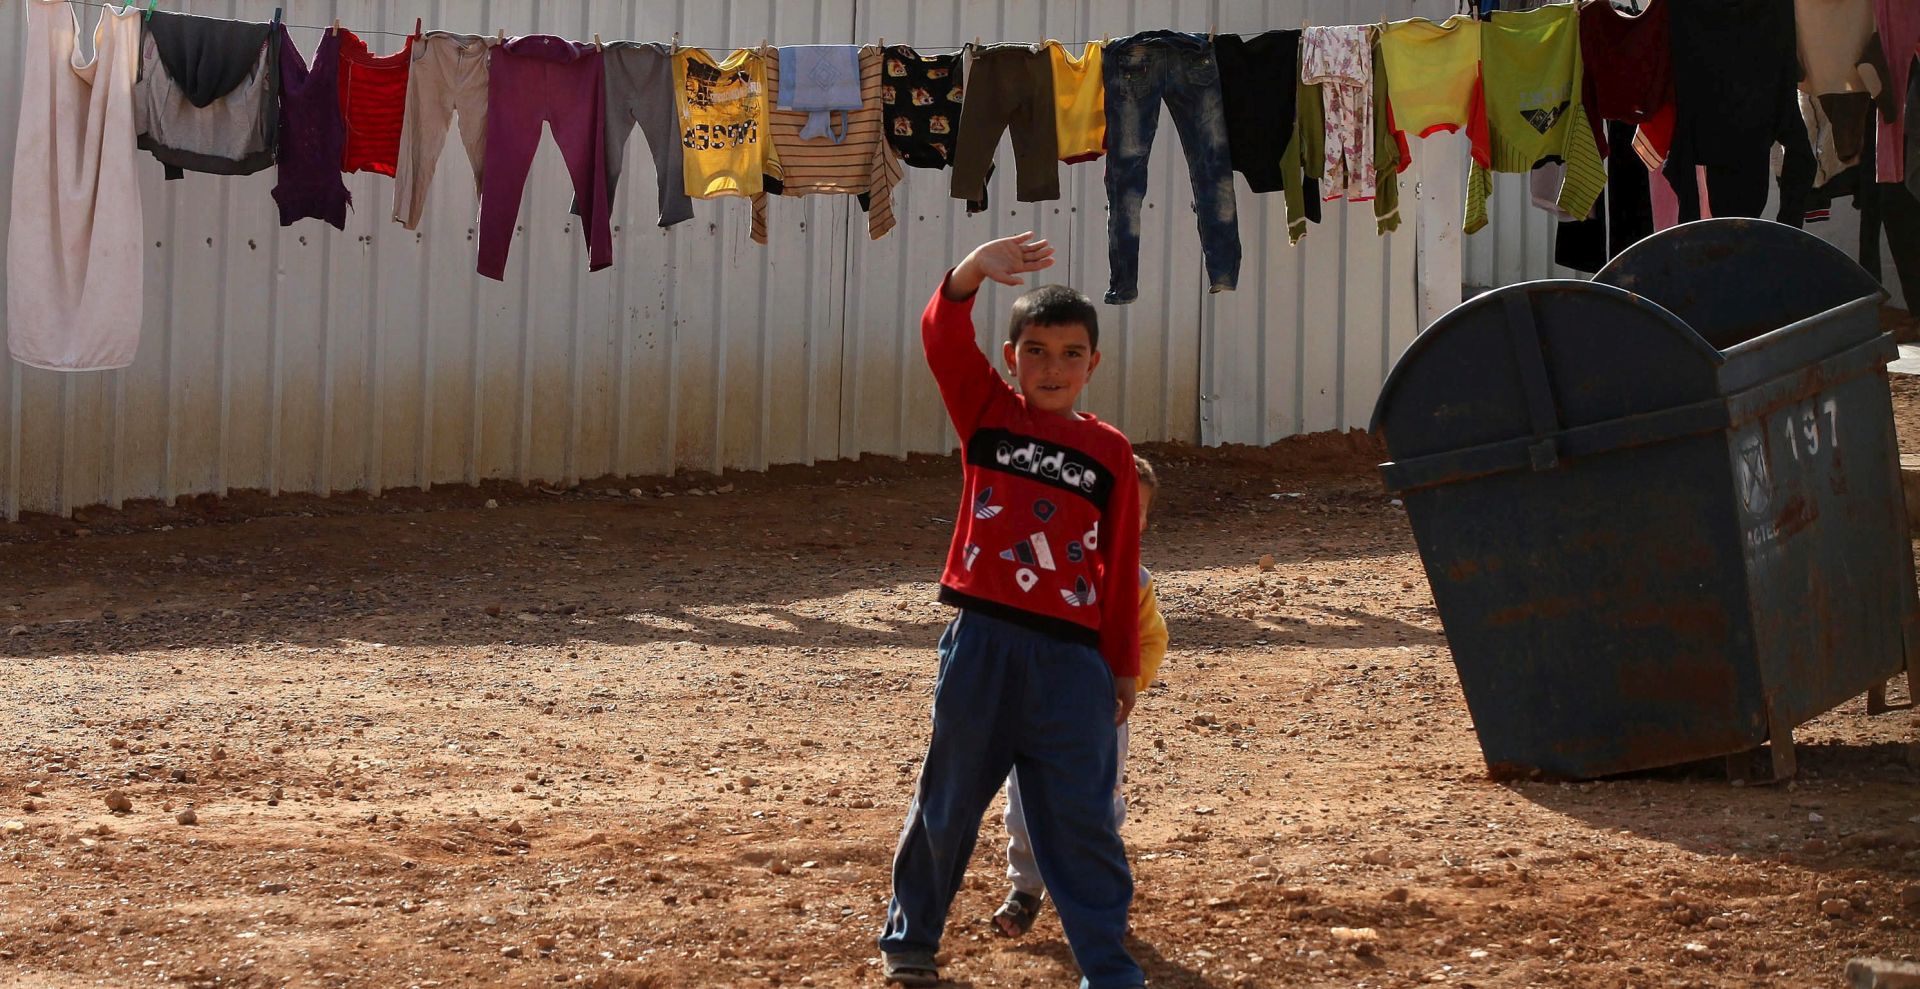 epa05135469 A Syrian child gestures at Azraq Syrian refugee camp, Jordan, 30 January 2016. Jordanian Prime Minister Abdullah Ensour visited the camp days before the Fourth international donors' conference in London to discuss the refugee crisis and ways to support them and the host countries.  EPA/JAMAL NASRALLAH